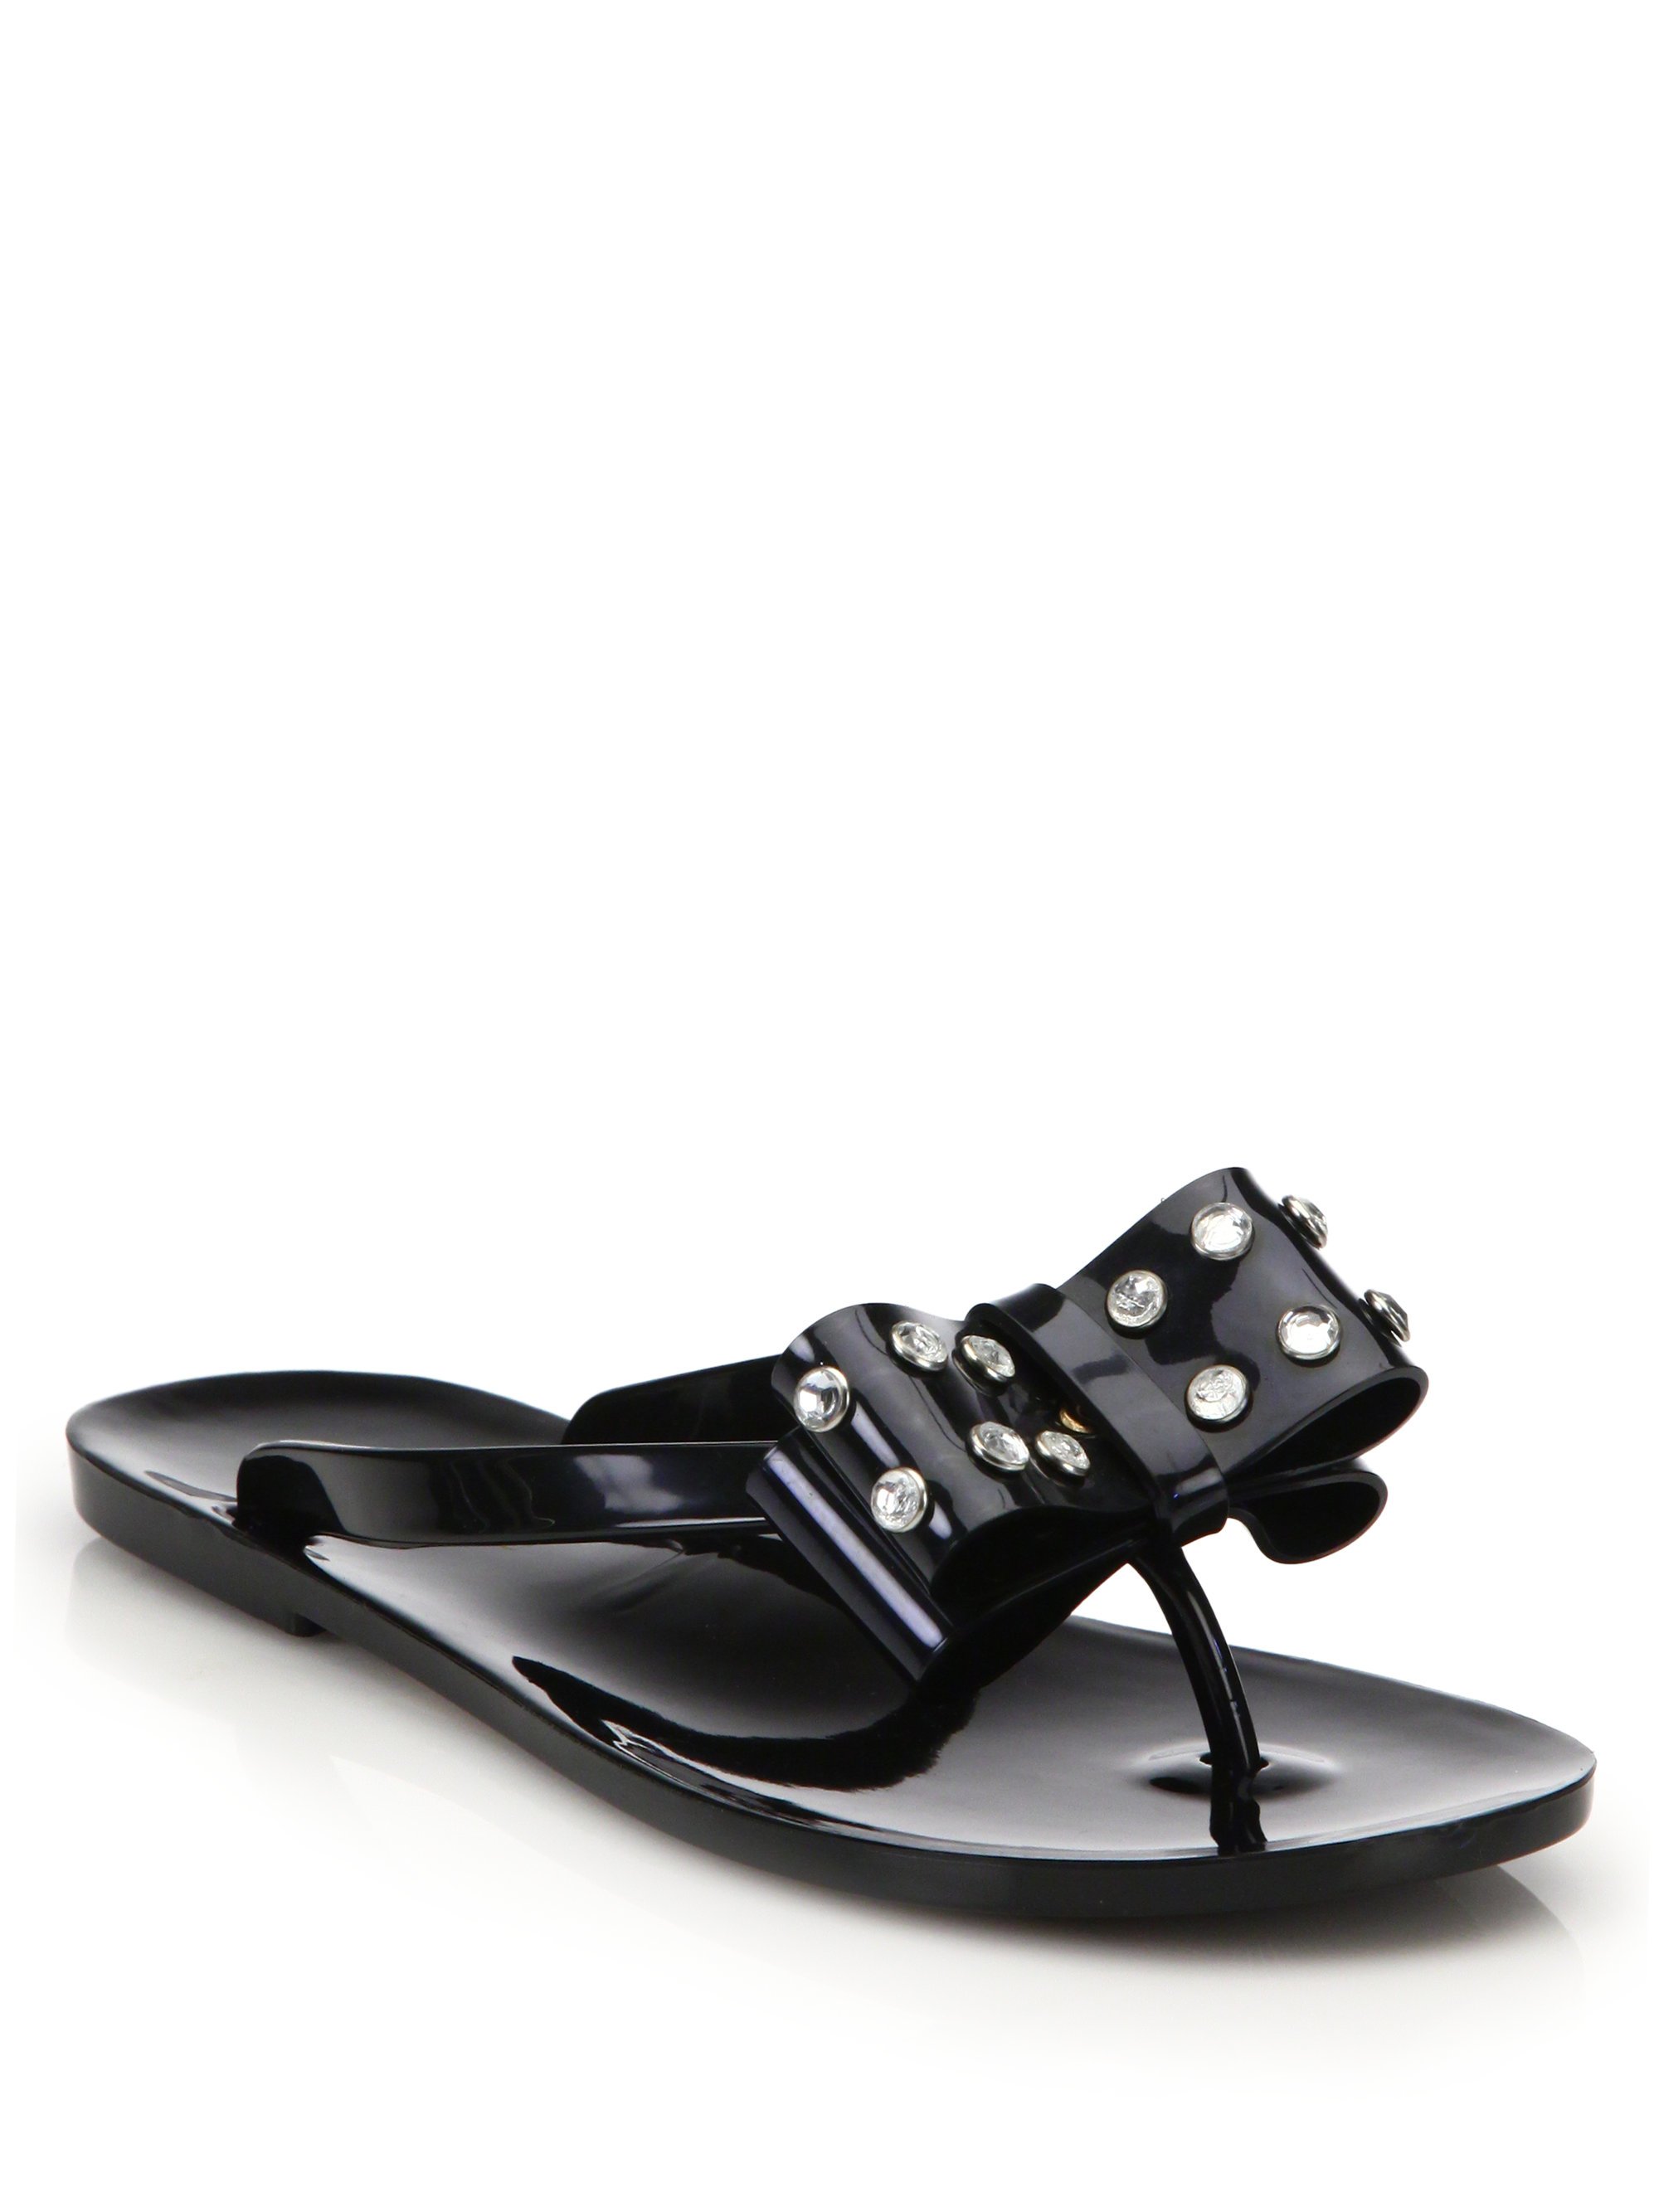 Kate Spade France Jelly Flat Sandals in Black | Lyst